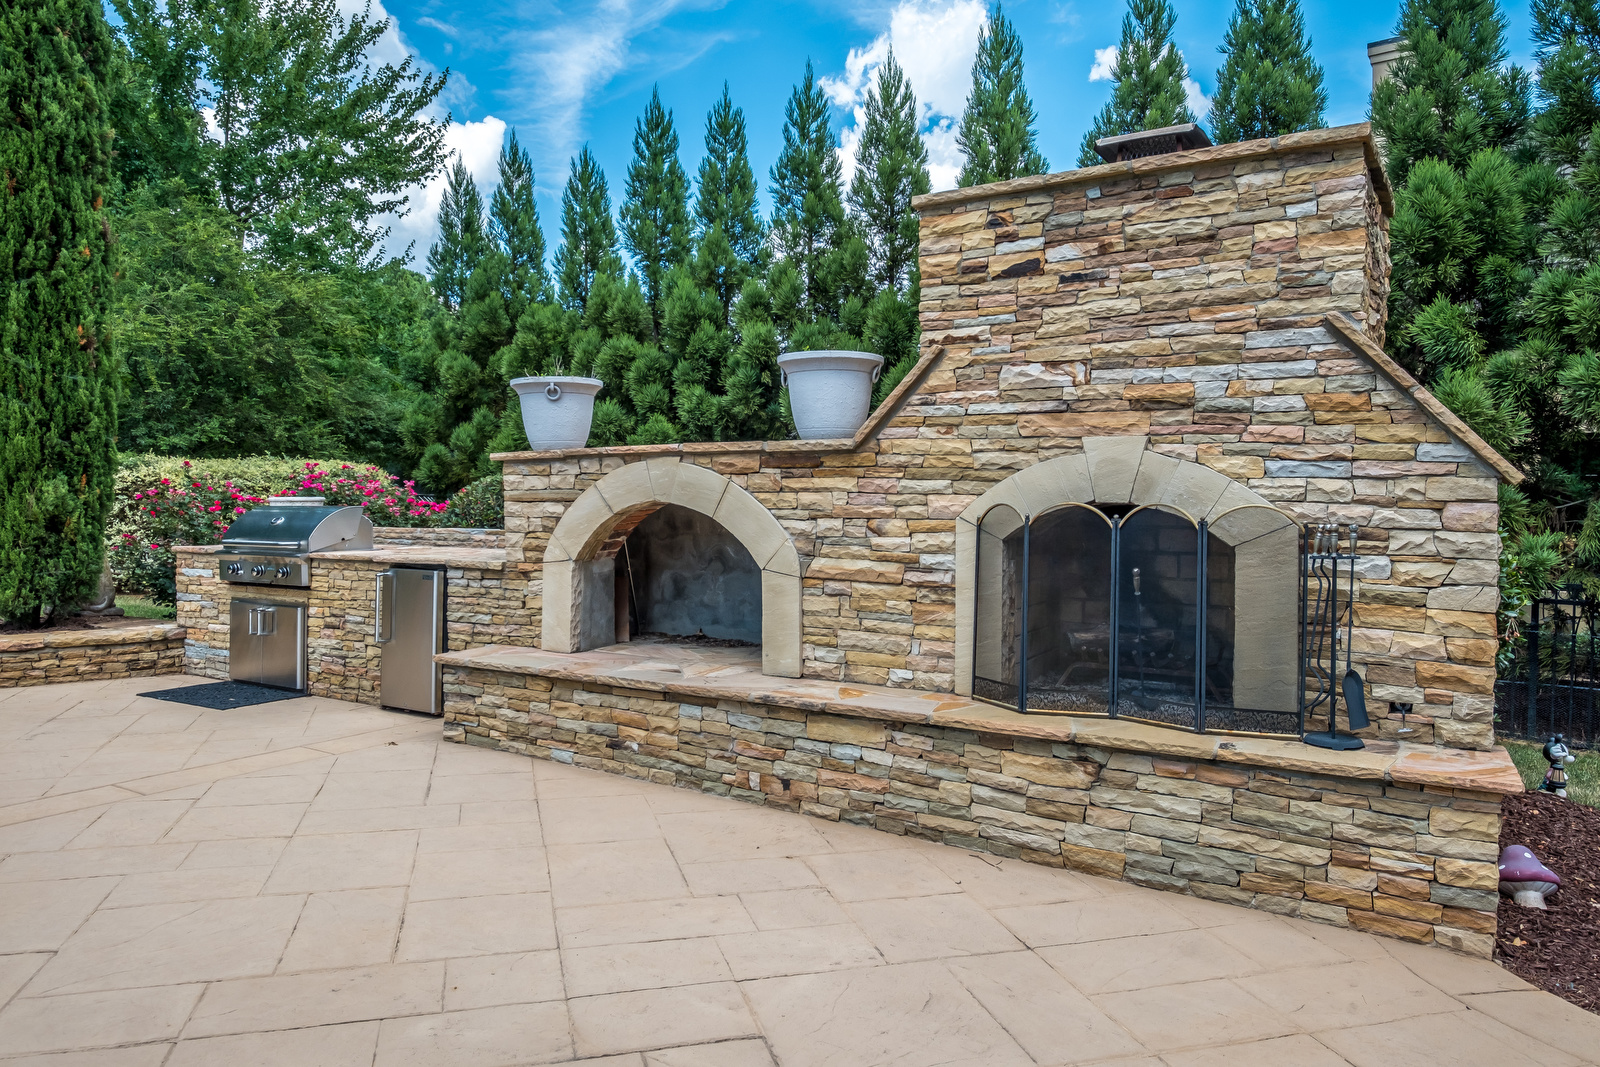 Backyard with stone grill area with built in grill beverage fridge pizza oven and fireplace with manicured trees behind it